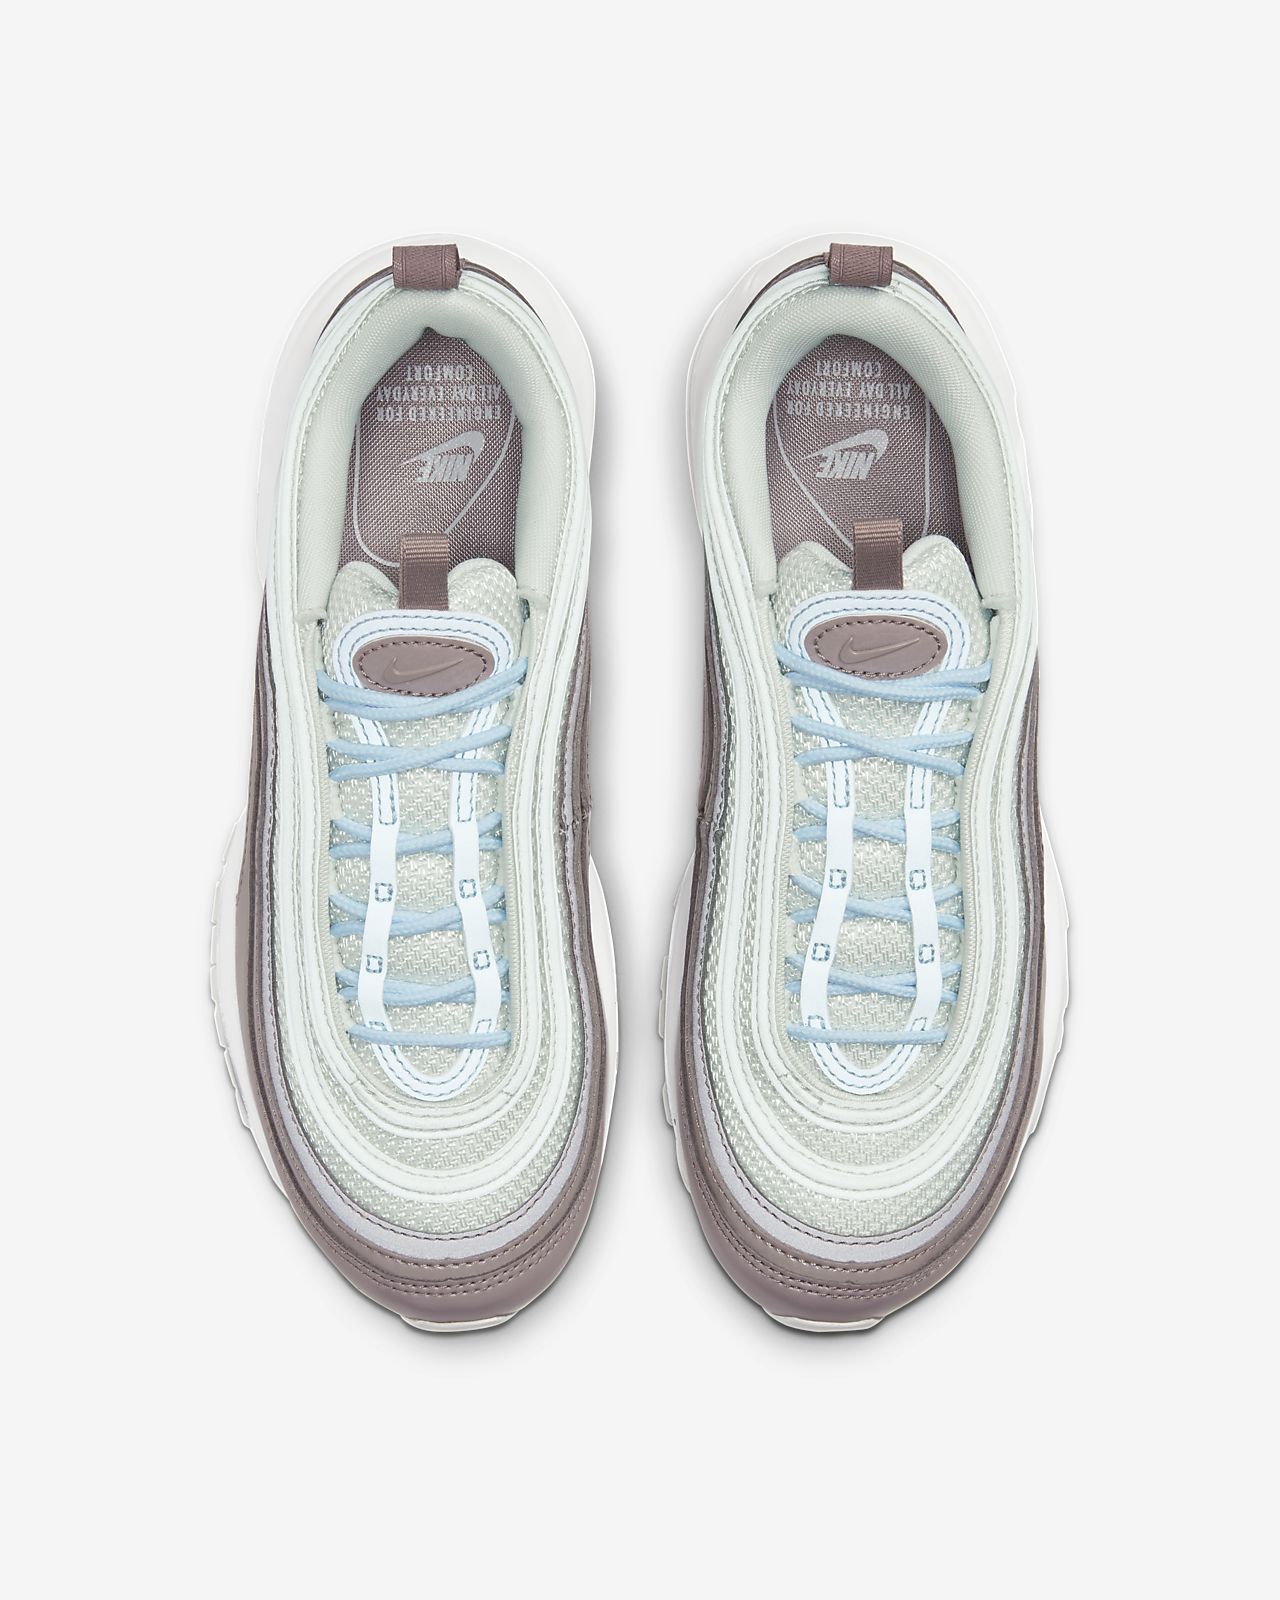 Air max 97 undefeated for Sale Clothes Gumtree